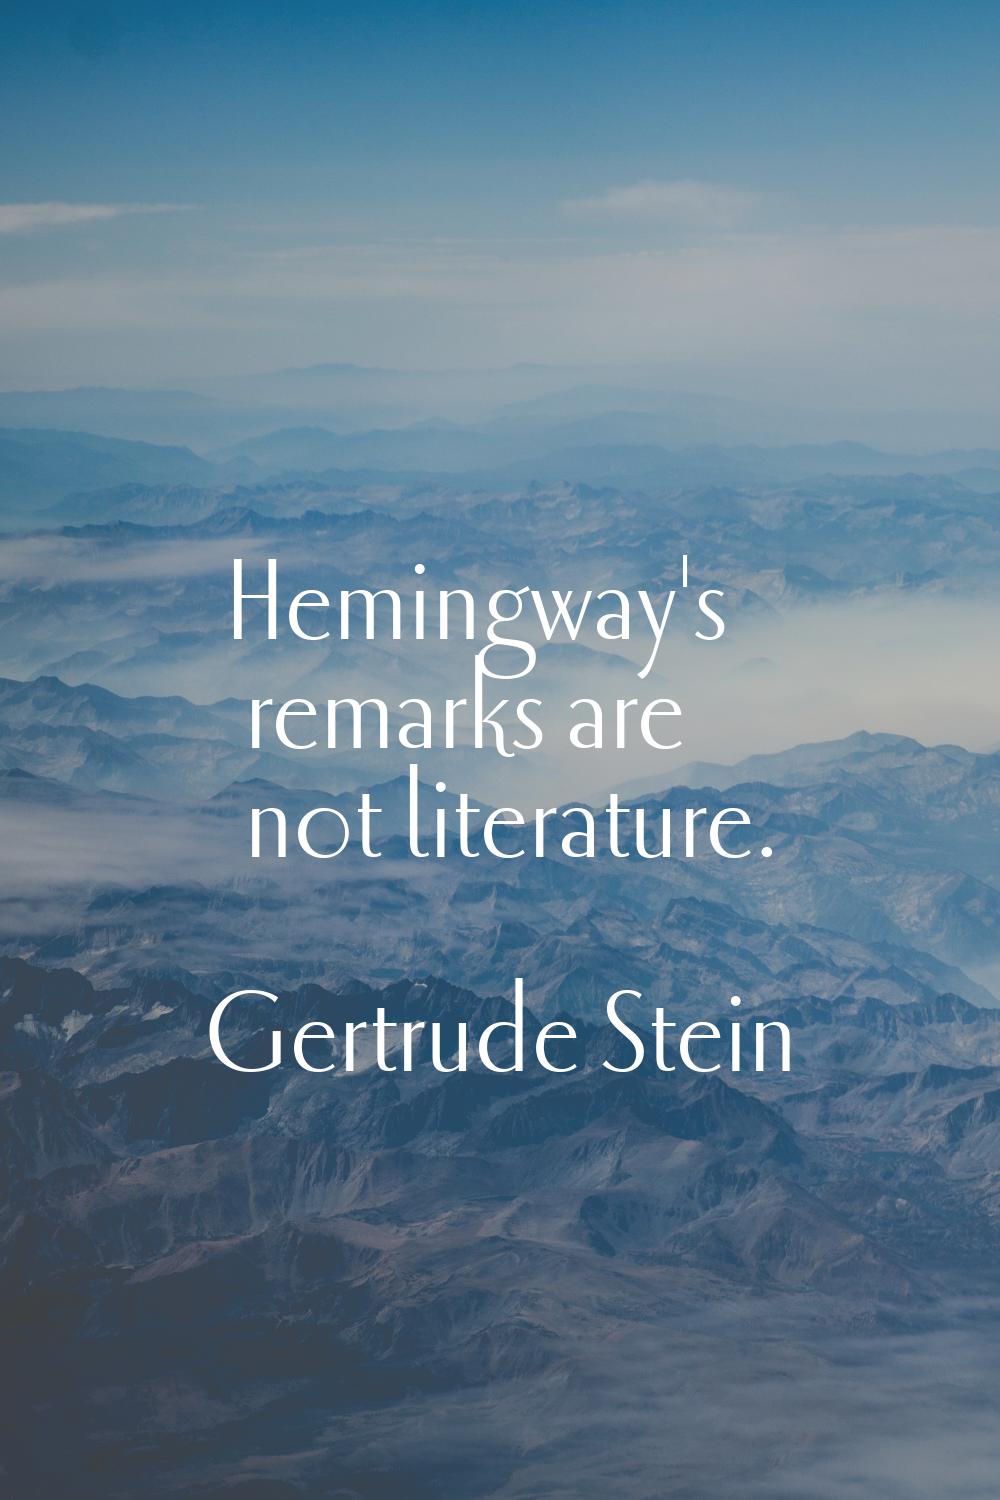 Hemingway's remarks are not literature.